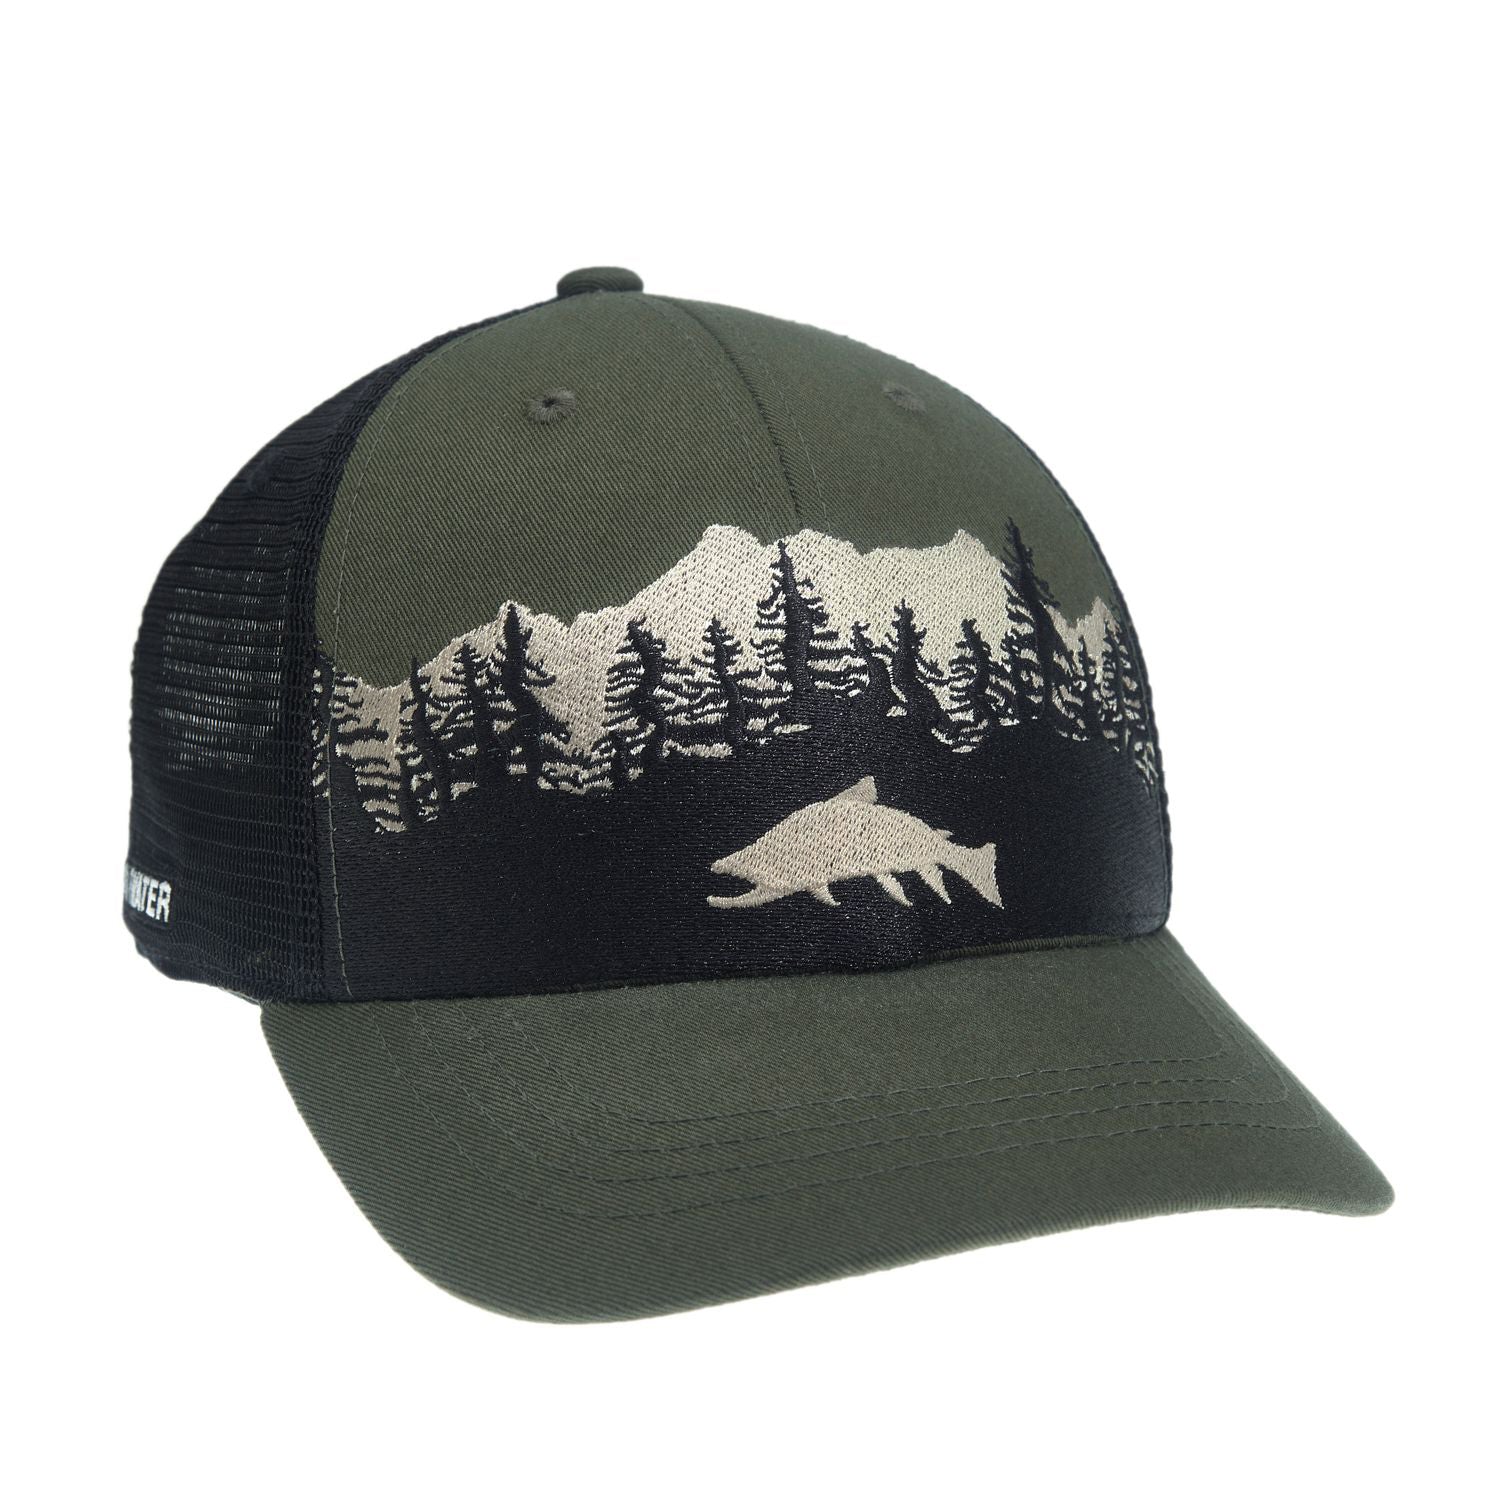  hat with black mesh in the back and a green brim.  The front has embroidery of a fish in front of pine trees and a mountain with green fabric in the background